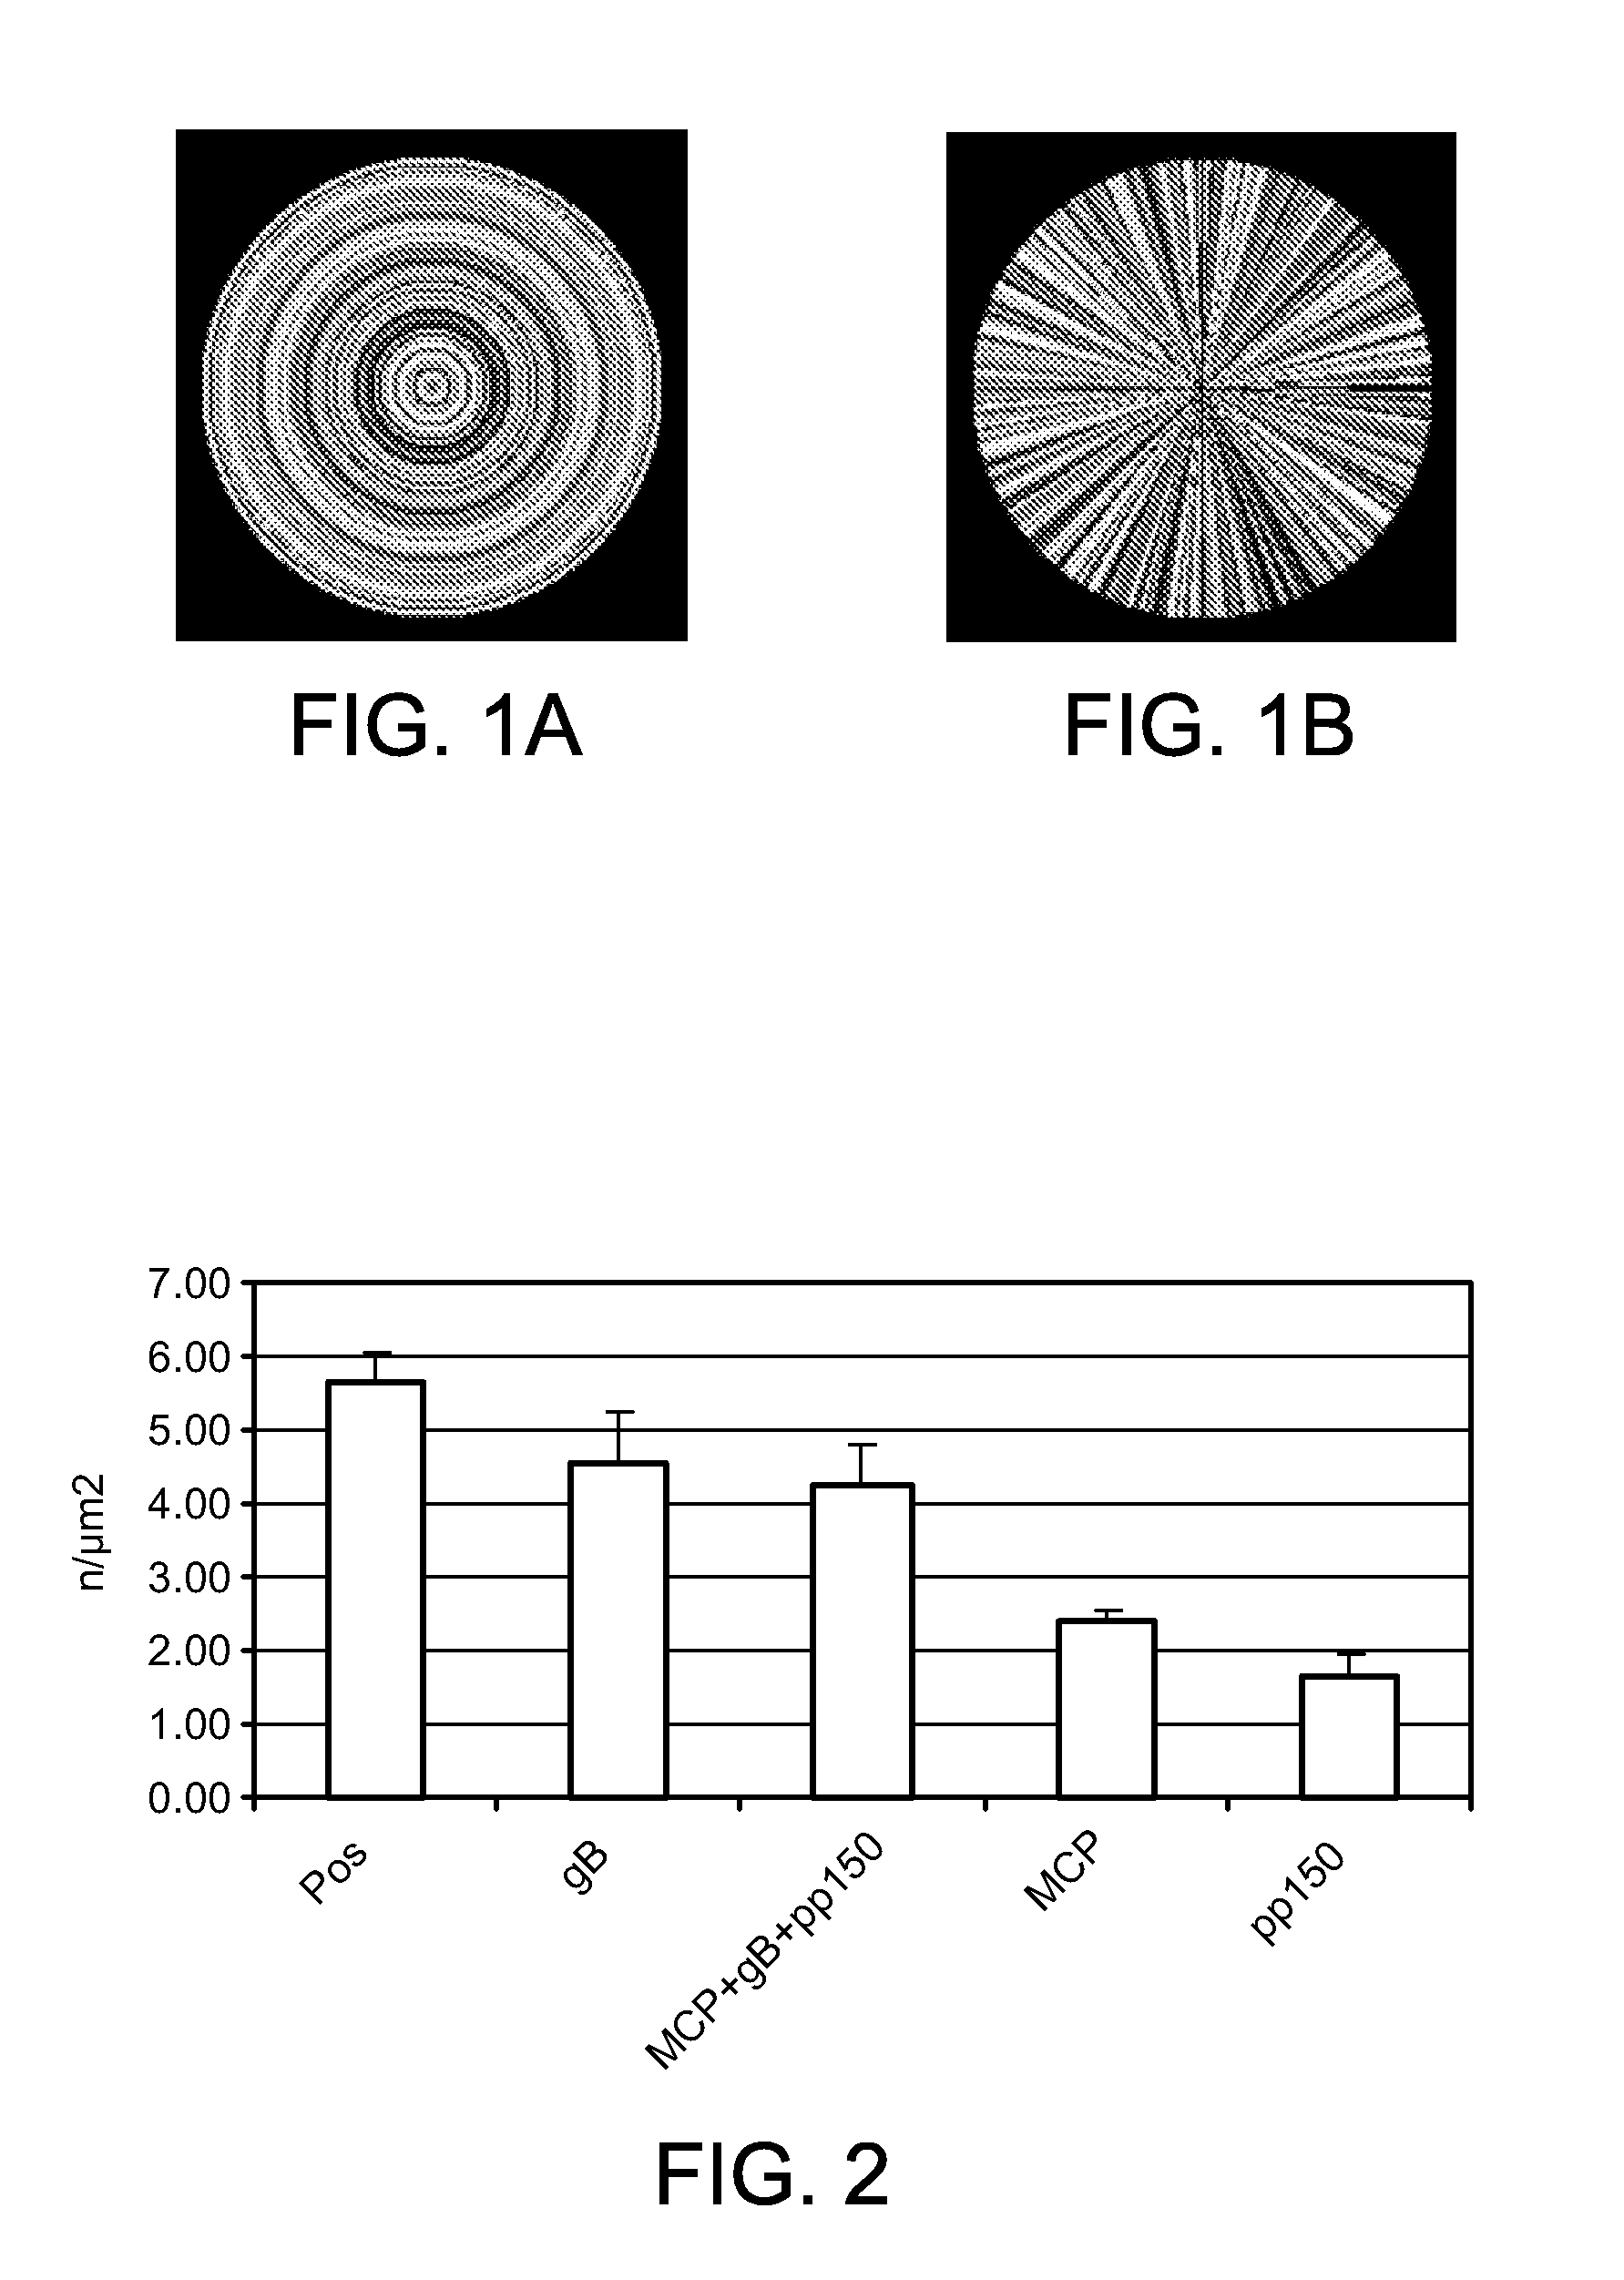 Method for counting and segmenting viral particles in an image